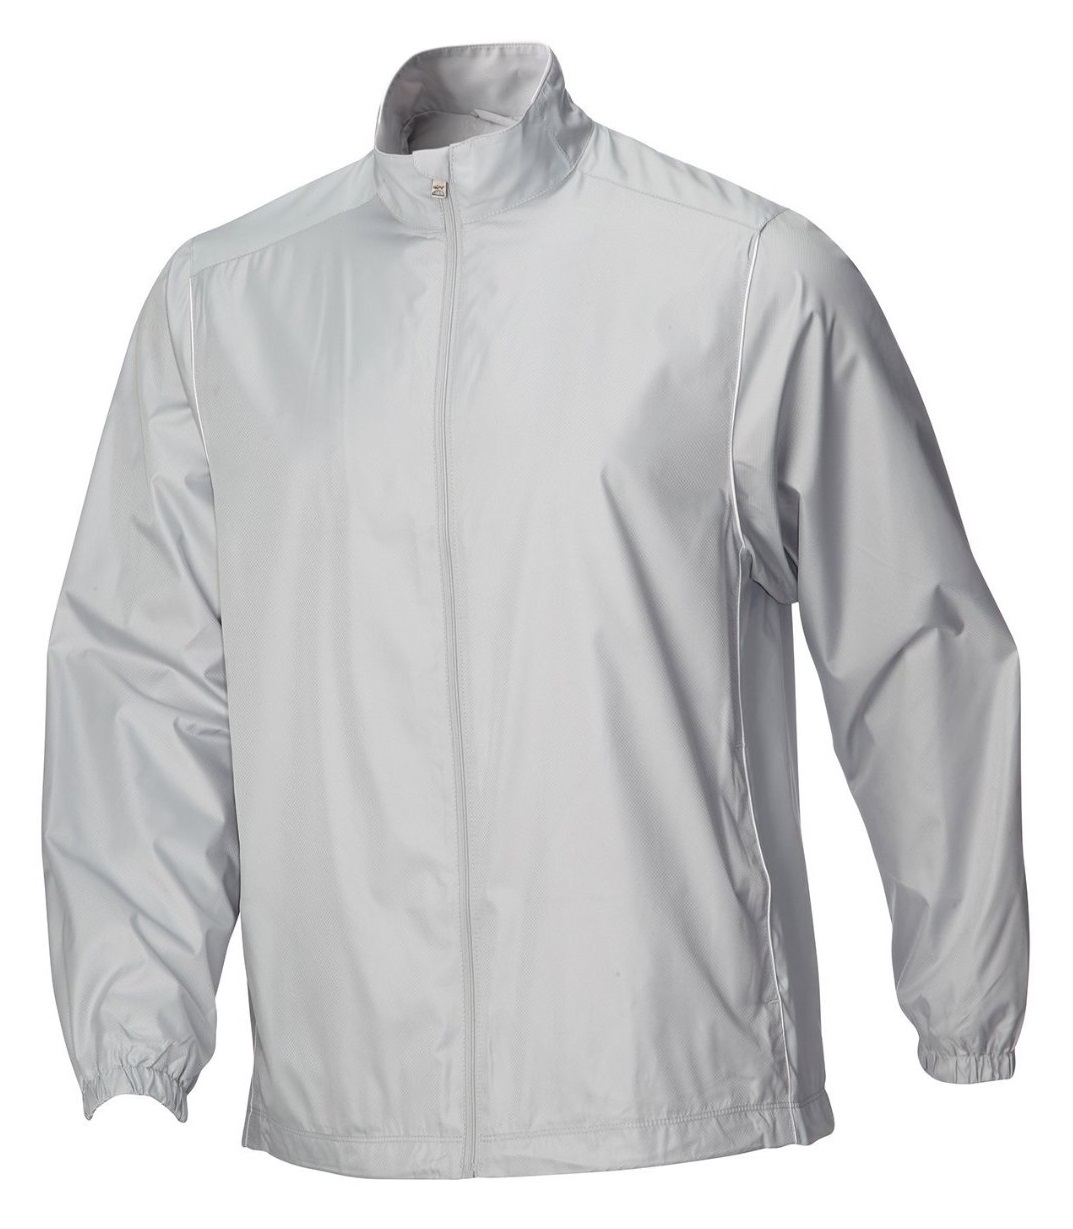 Greg Norman Mens Water Resistant Performance Jackets